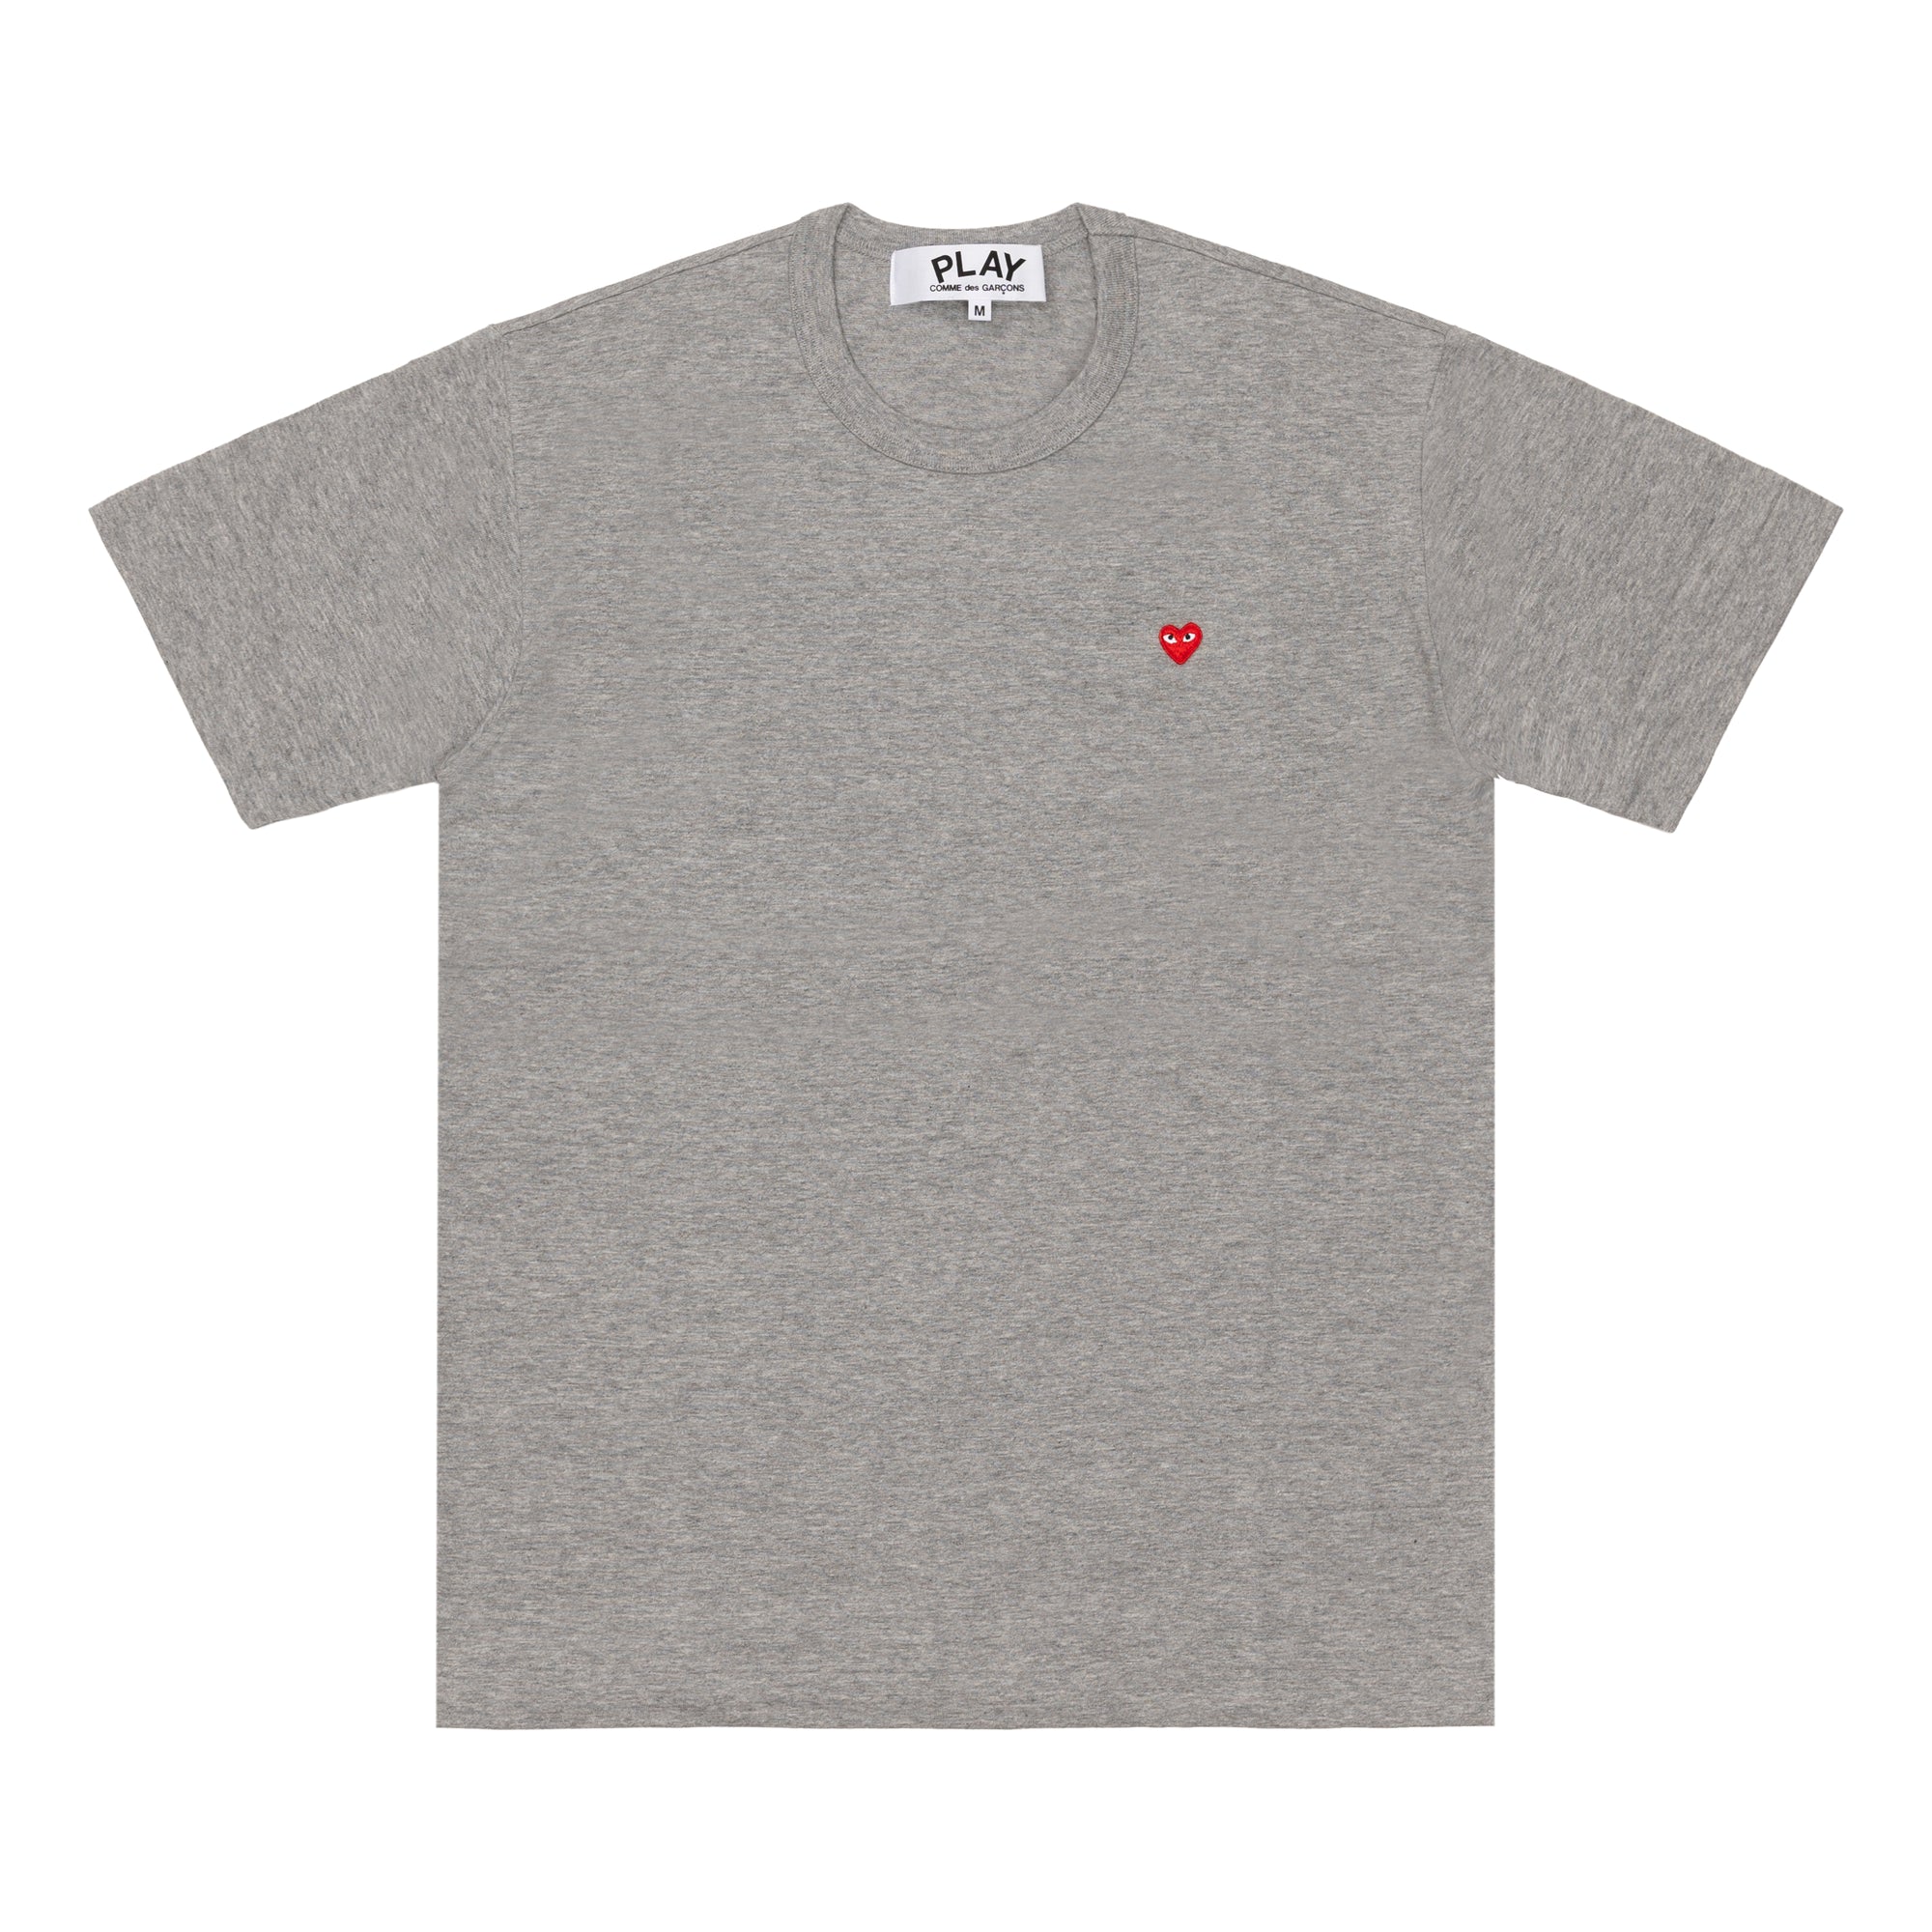 PLAY CDG - T-SHIRT WITH SMALL RED HEART - (TOP GREY) view 1